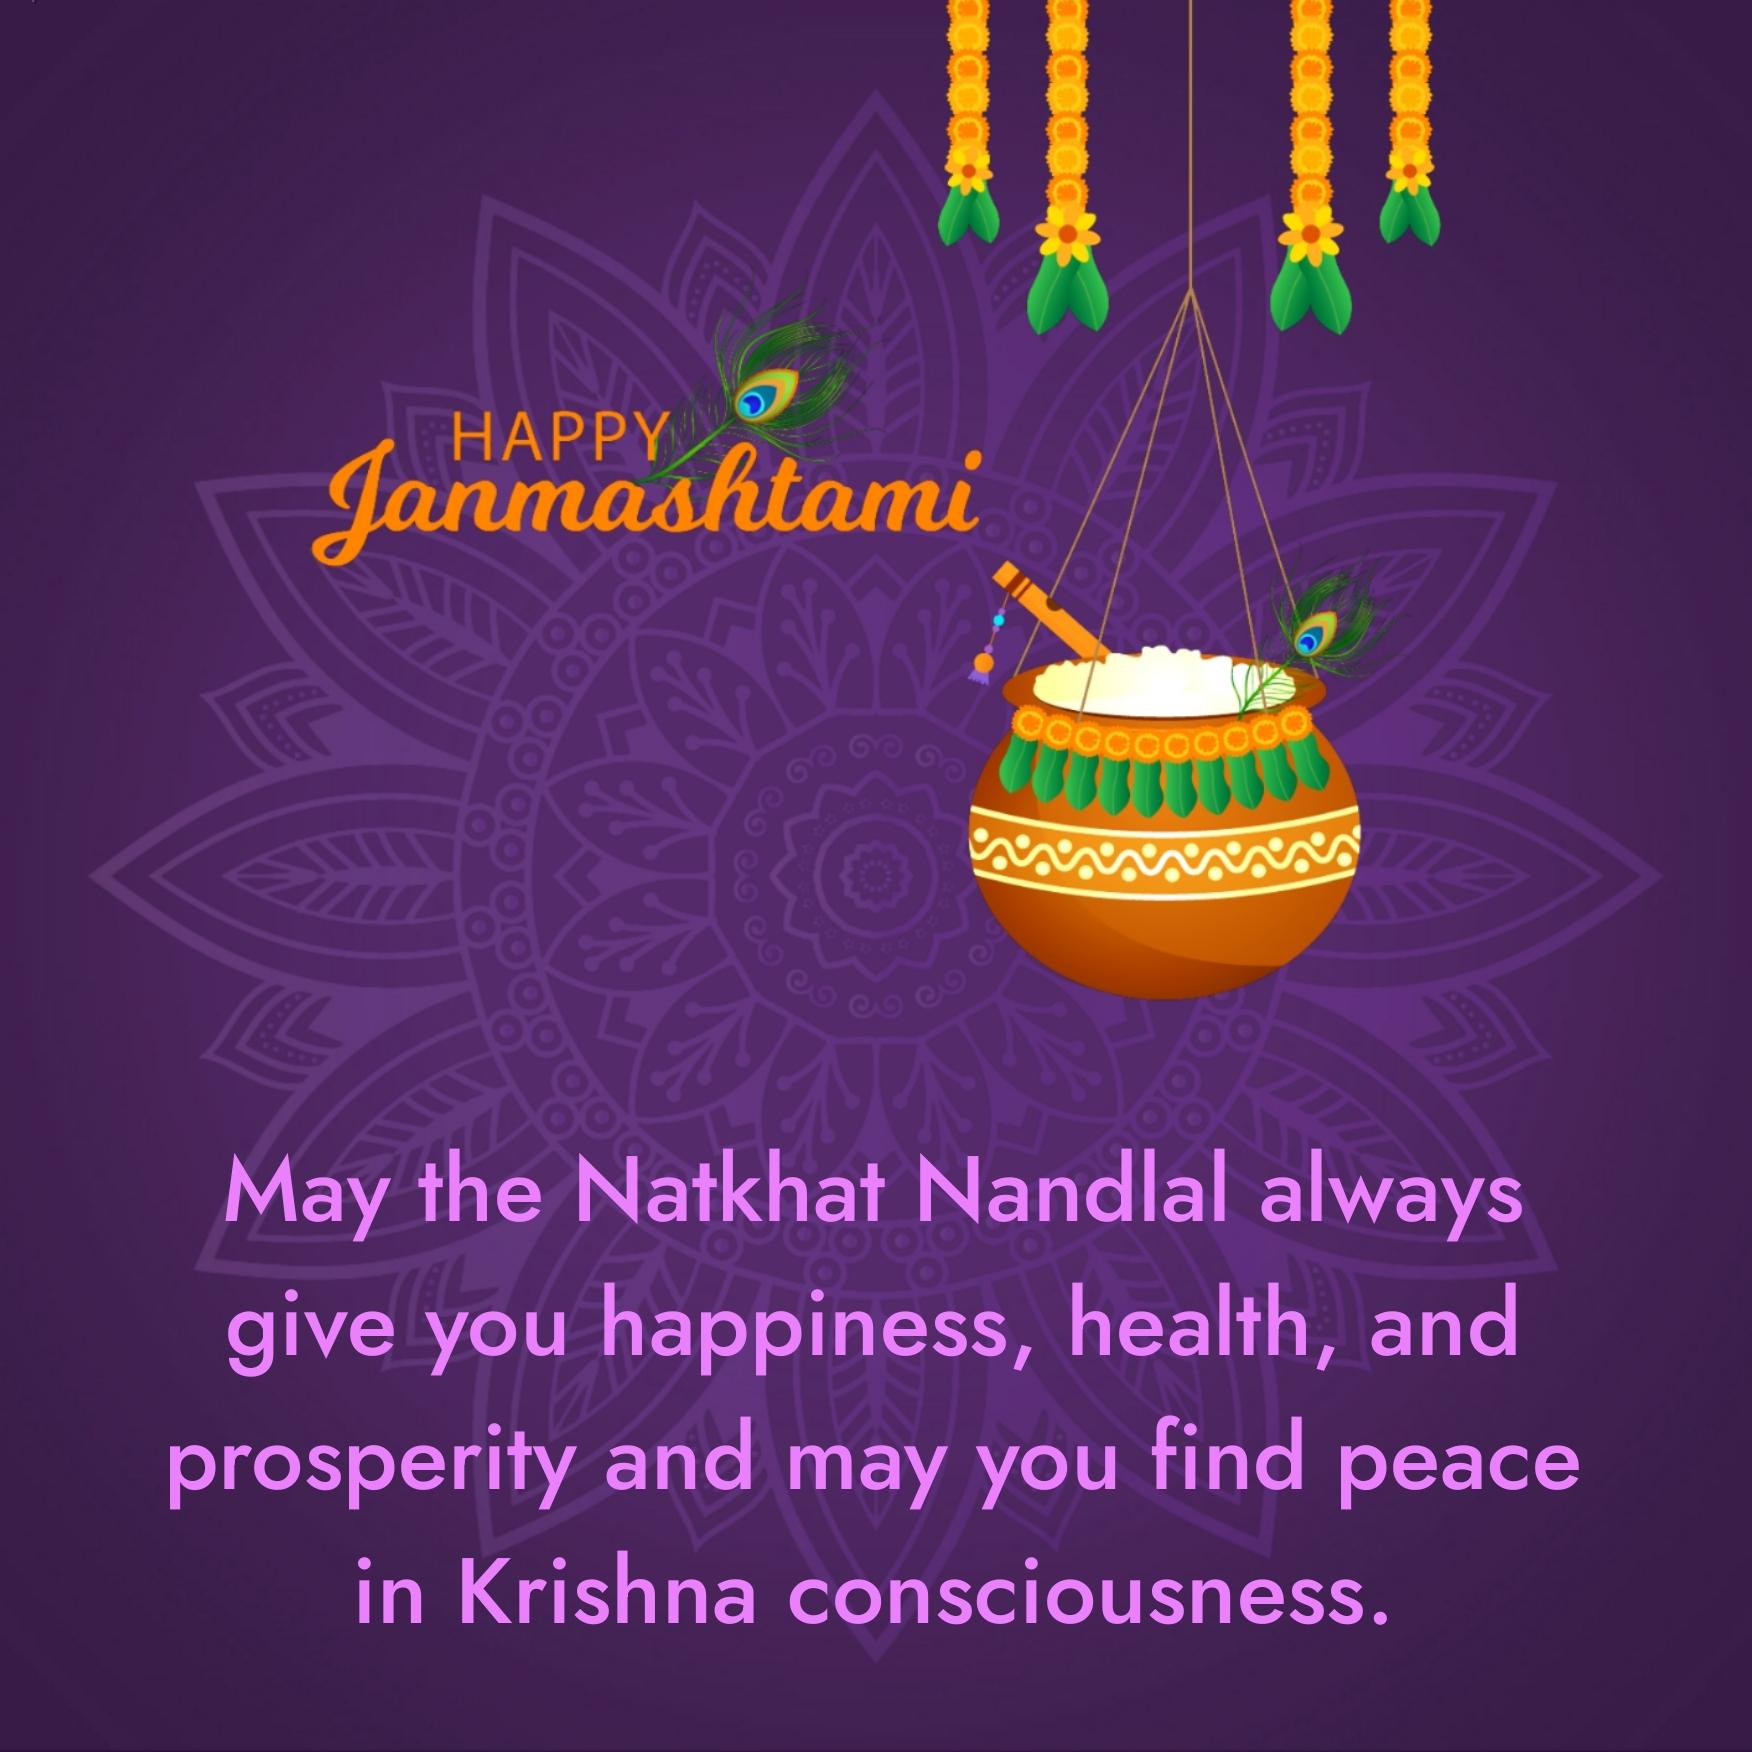 May the Nnatkhat Nandlal always give you happiness